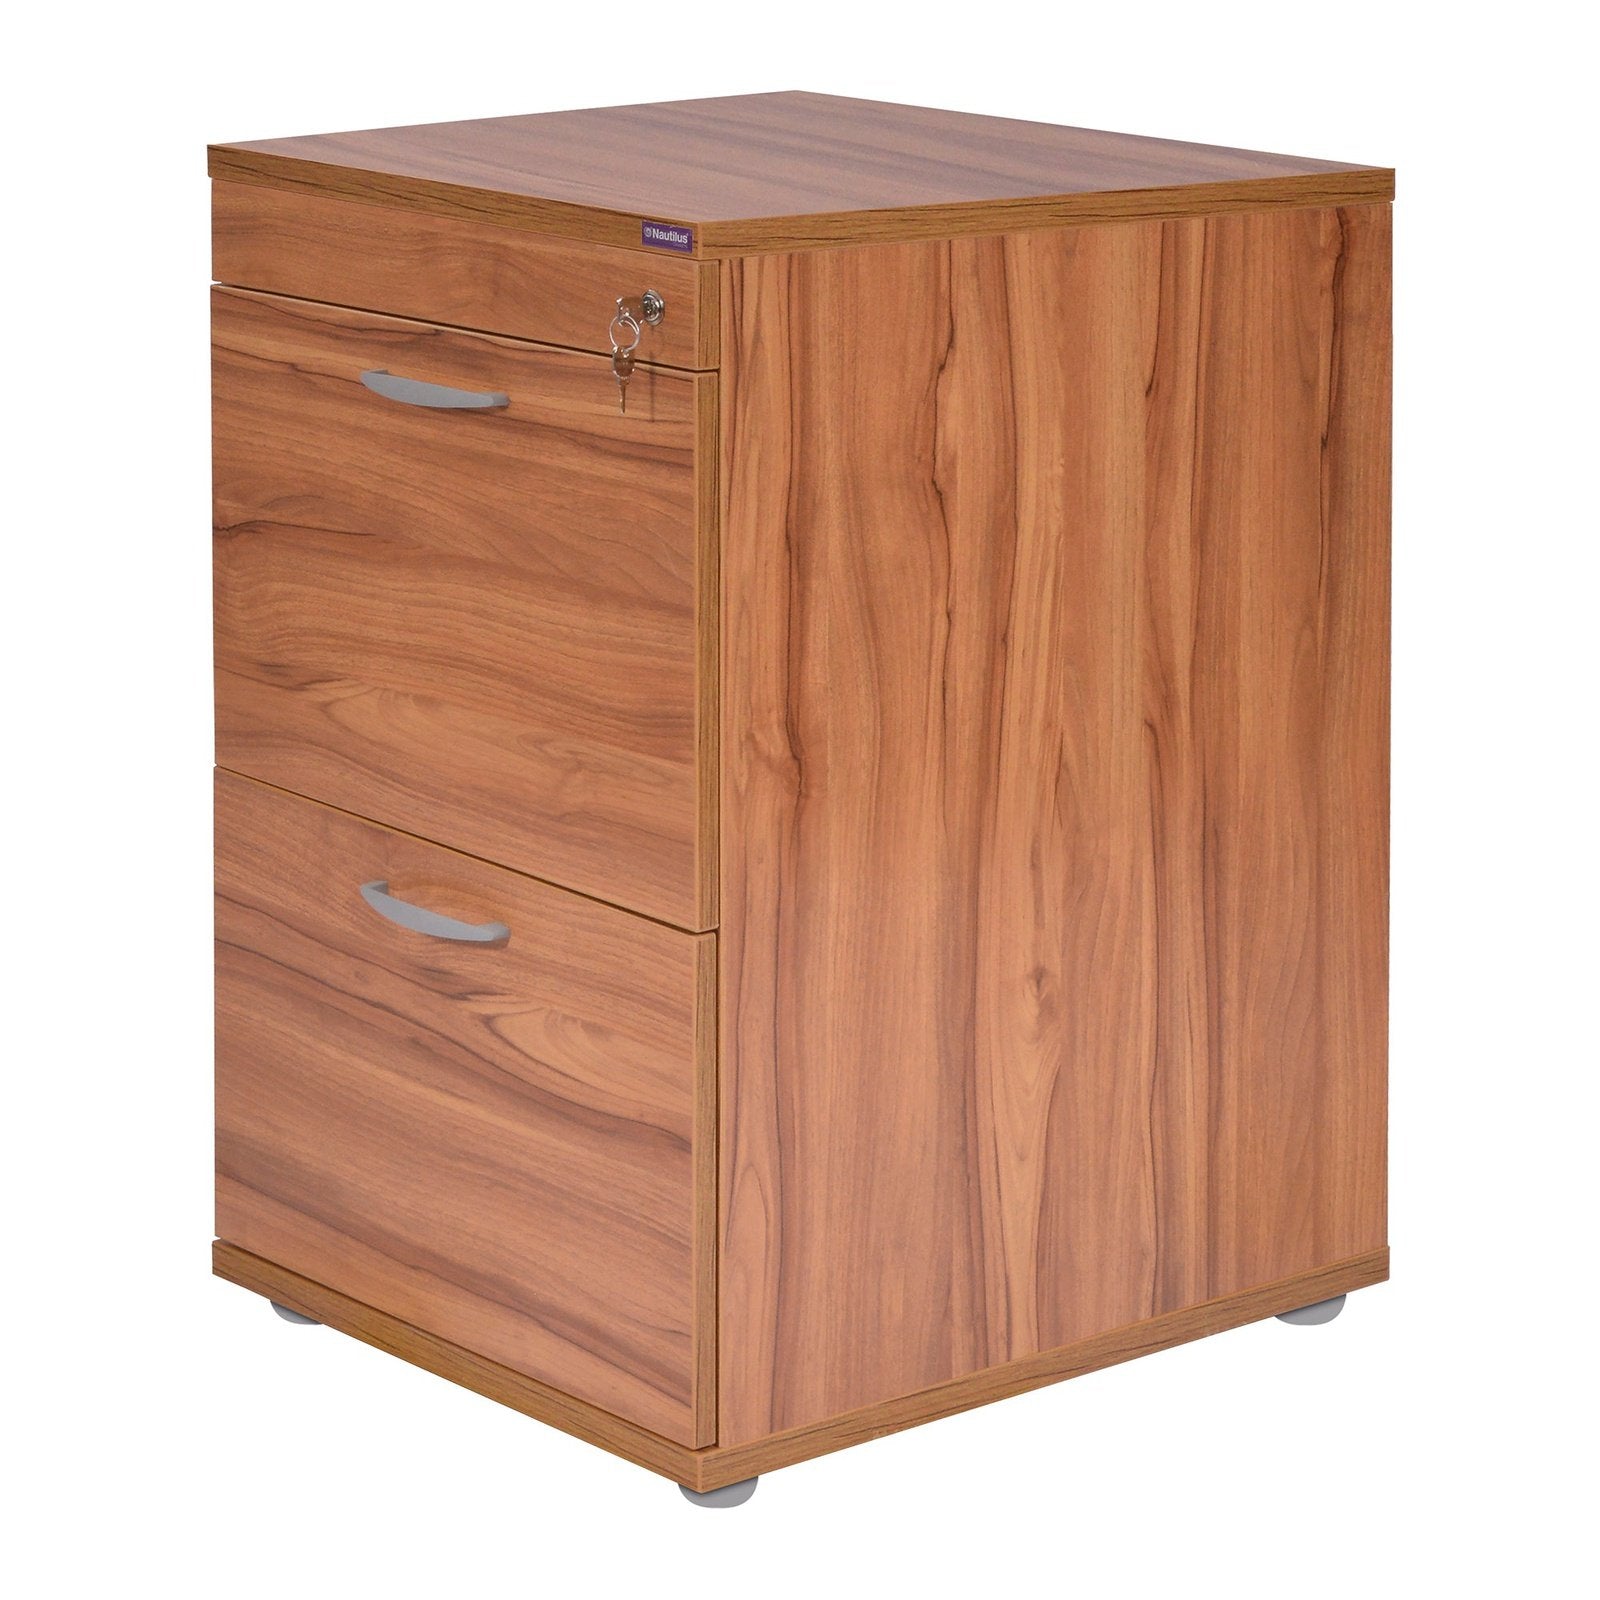 Filing Cabinet - 2 Drawer - Office Products Online